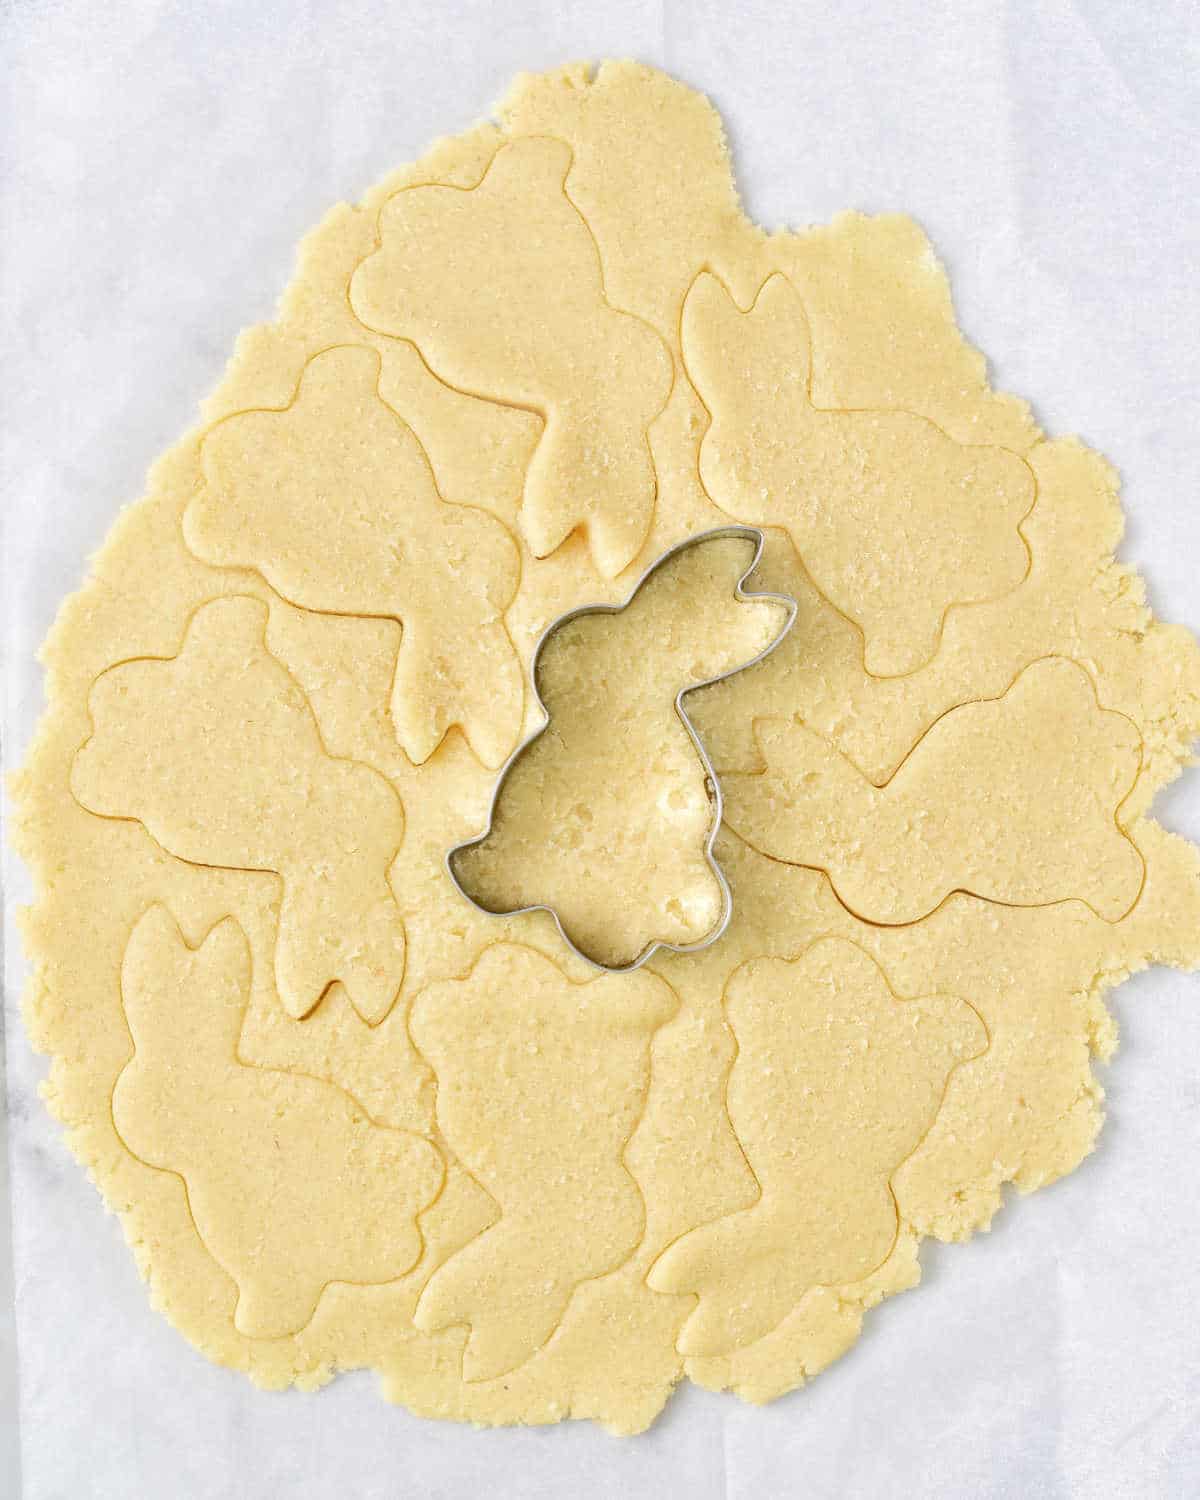 Rolled sugar cookie dough with bunny shaped cut outs and a bunny metal cutter. Parchment paper underneath.